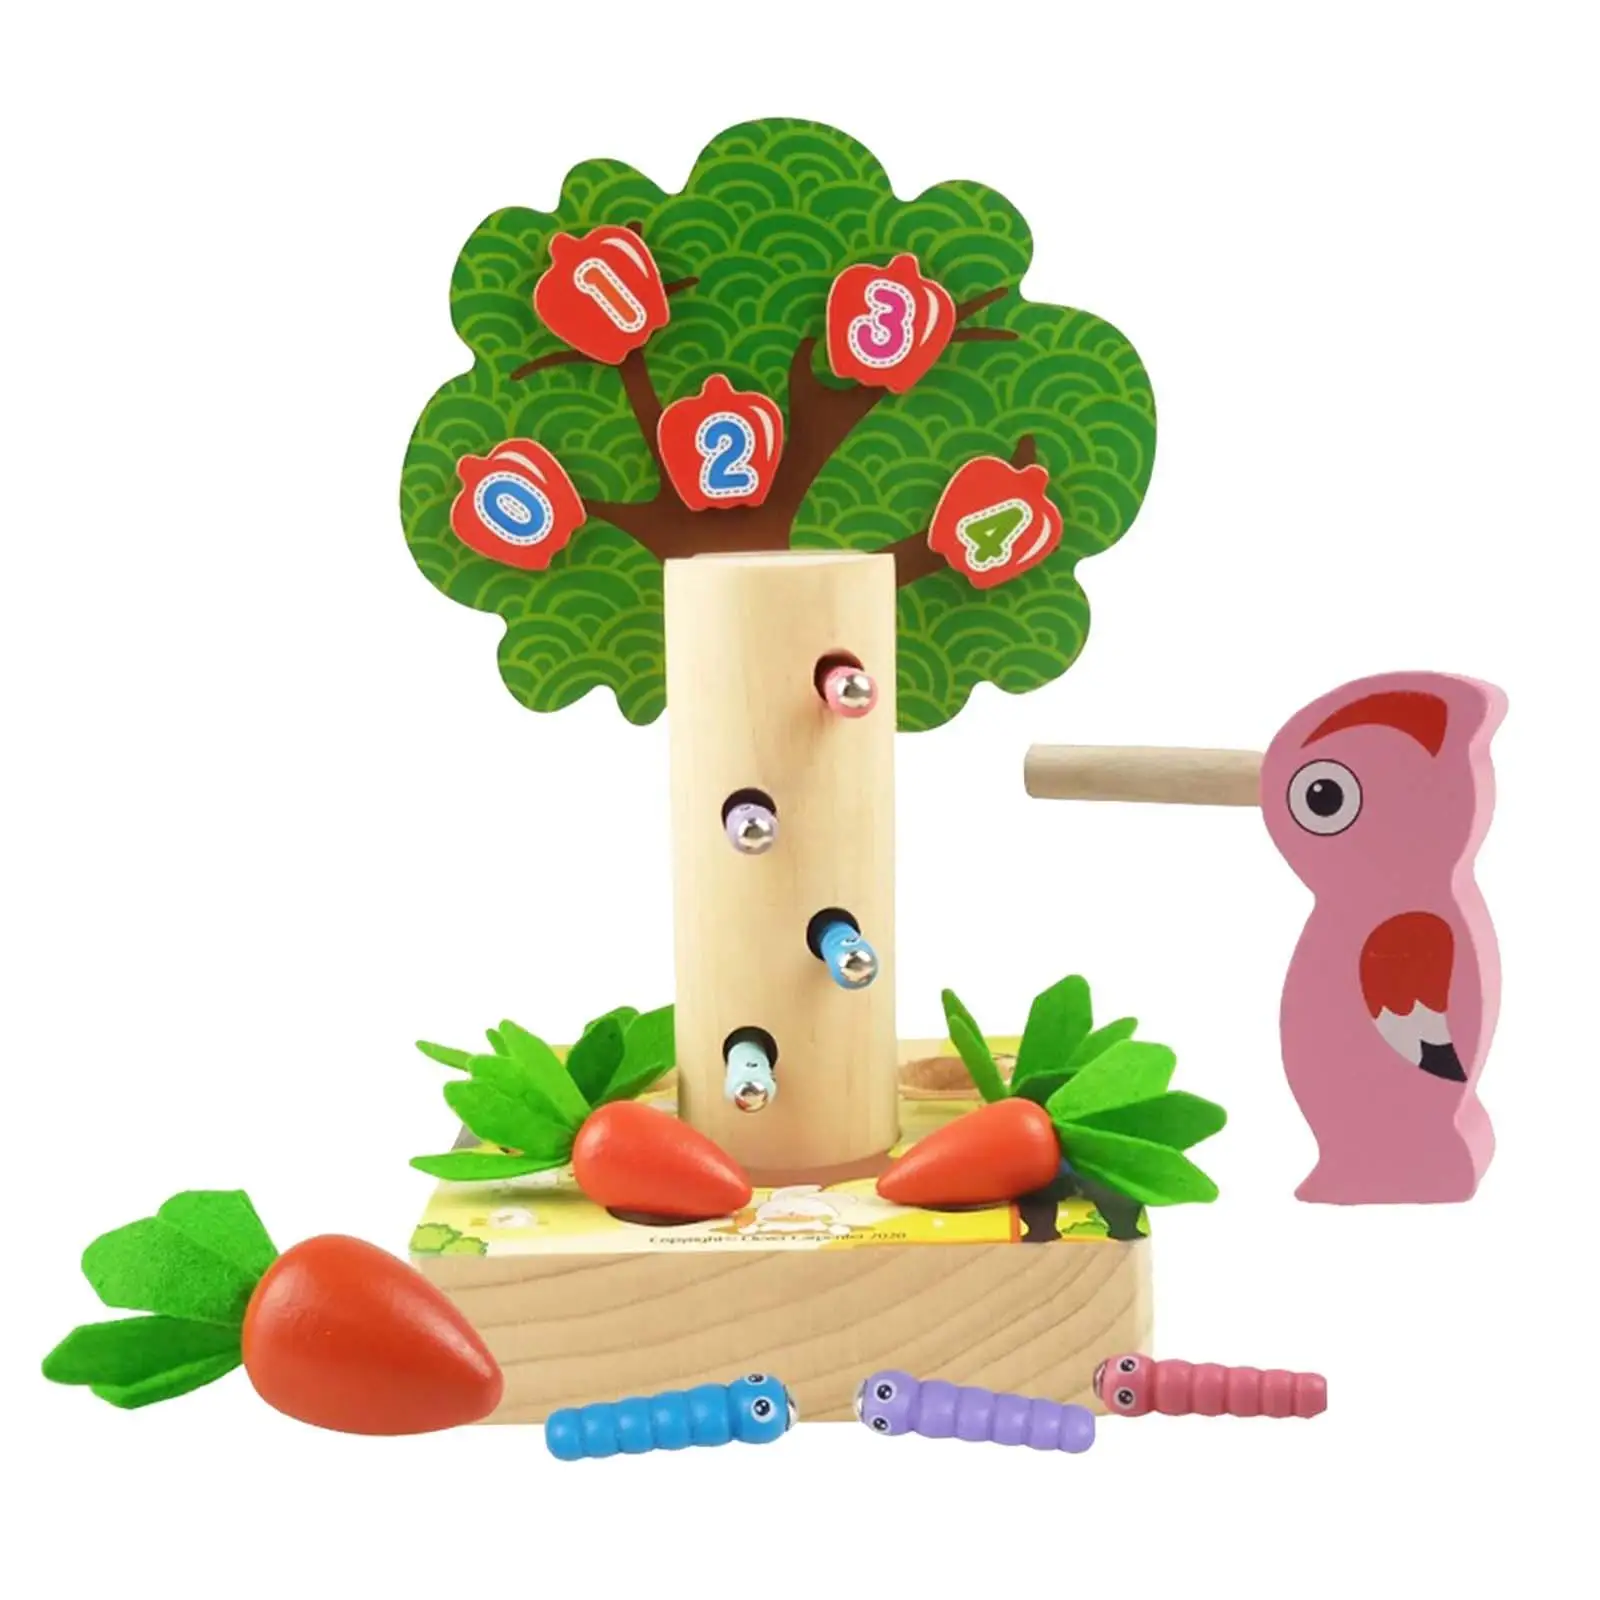 Apples Picking Magnetic Fruit Tree Toy Early Learning Carrot Harvest Game Wooden Color Shape Sorting Game for Toddler Girls Boys